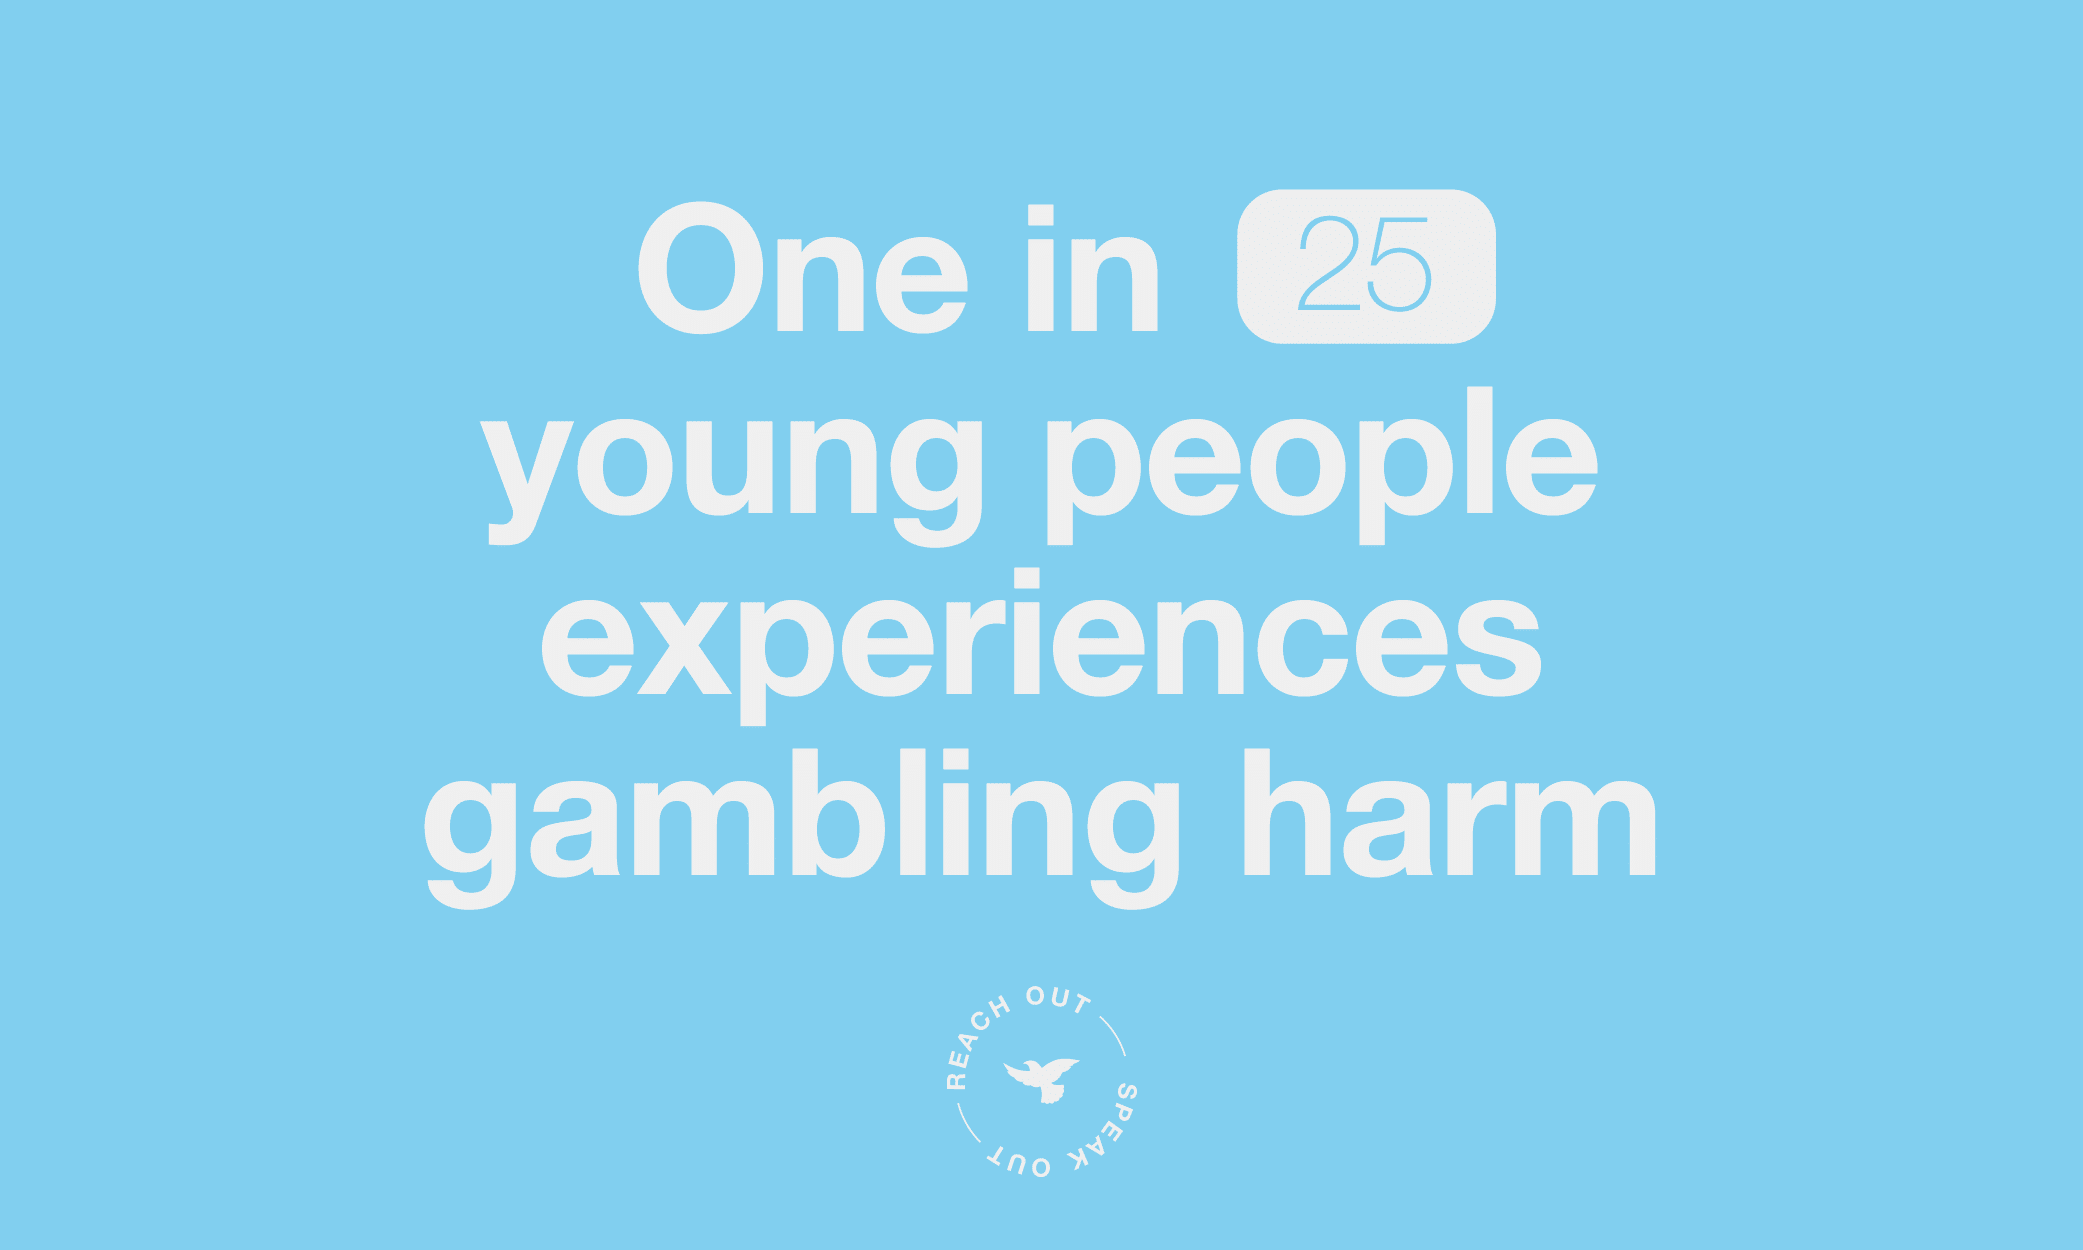 one in 25 young people experiences gambling harm